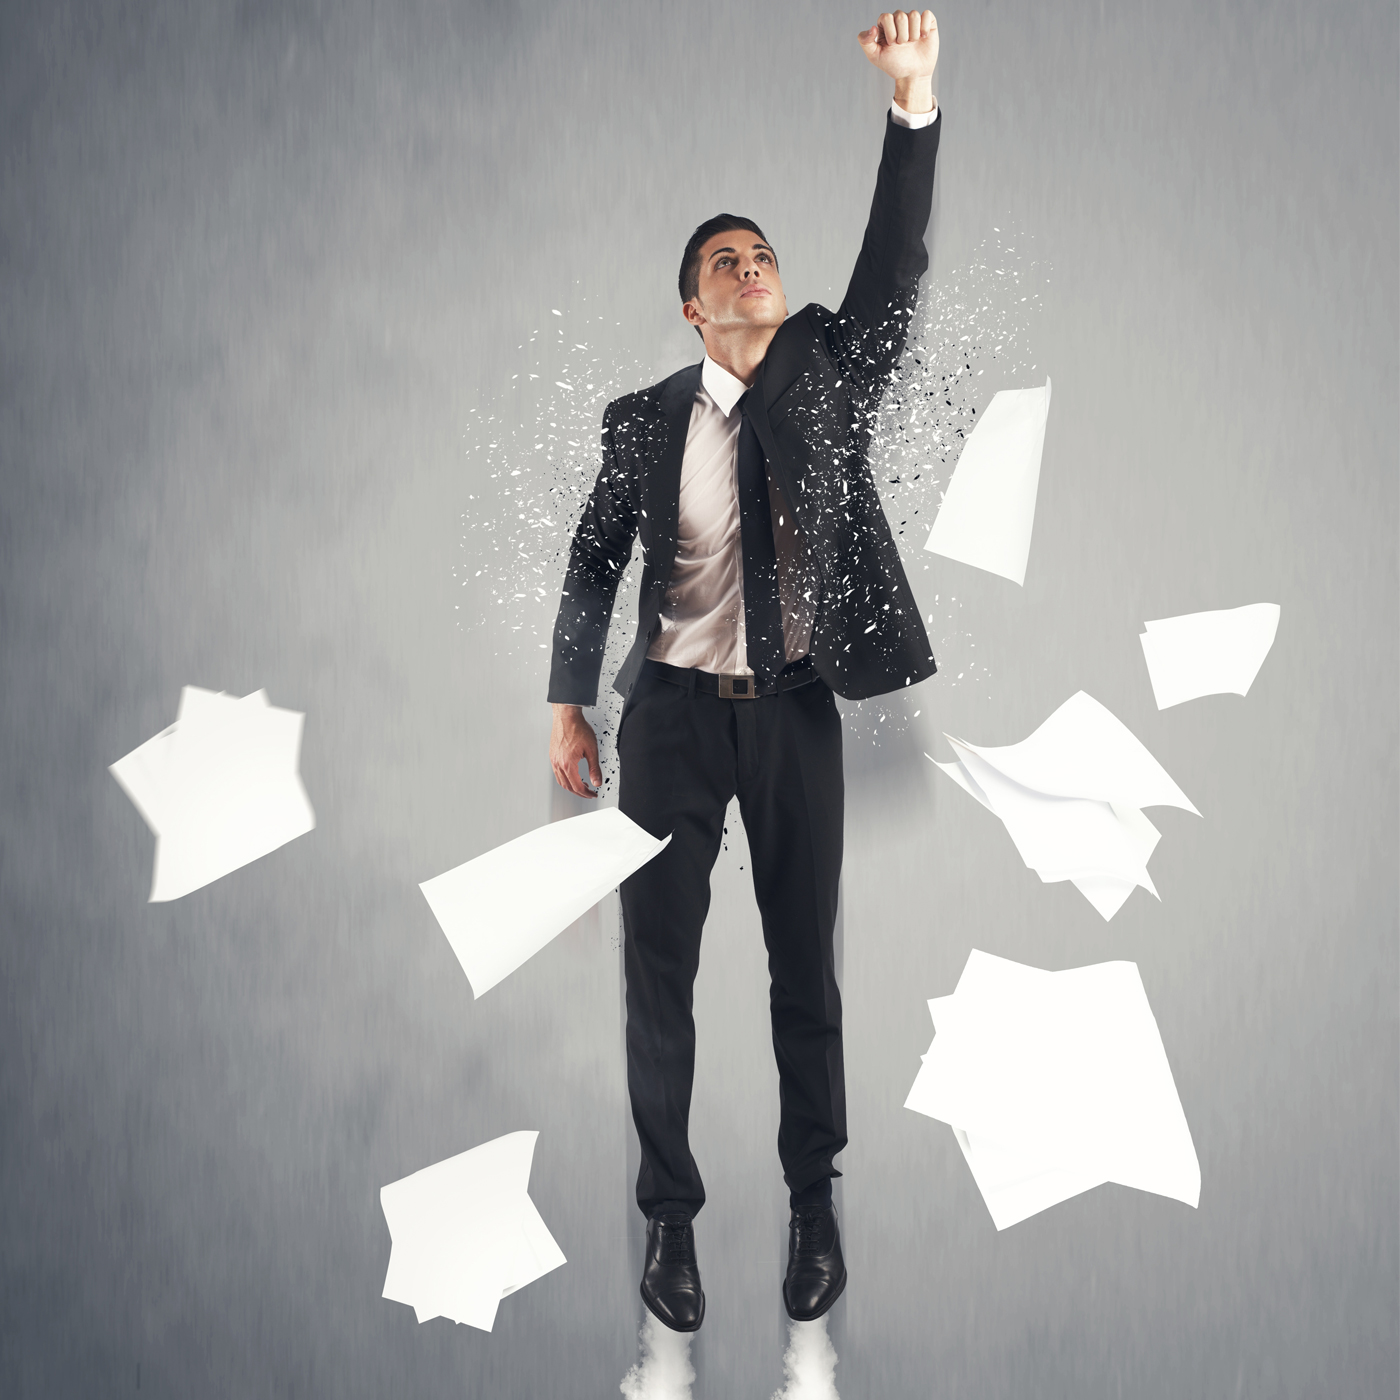 man dressed in an office formals throwing the pile of papers in the air